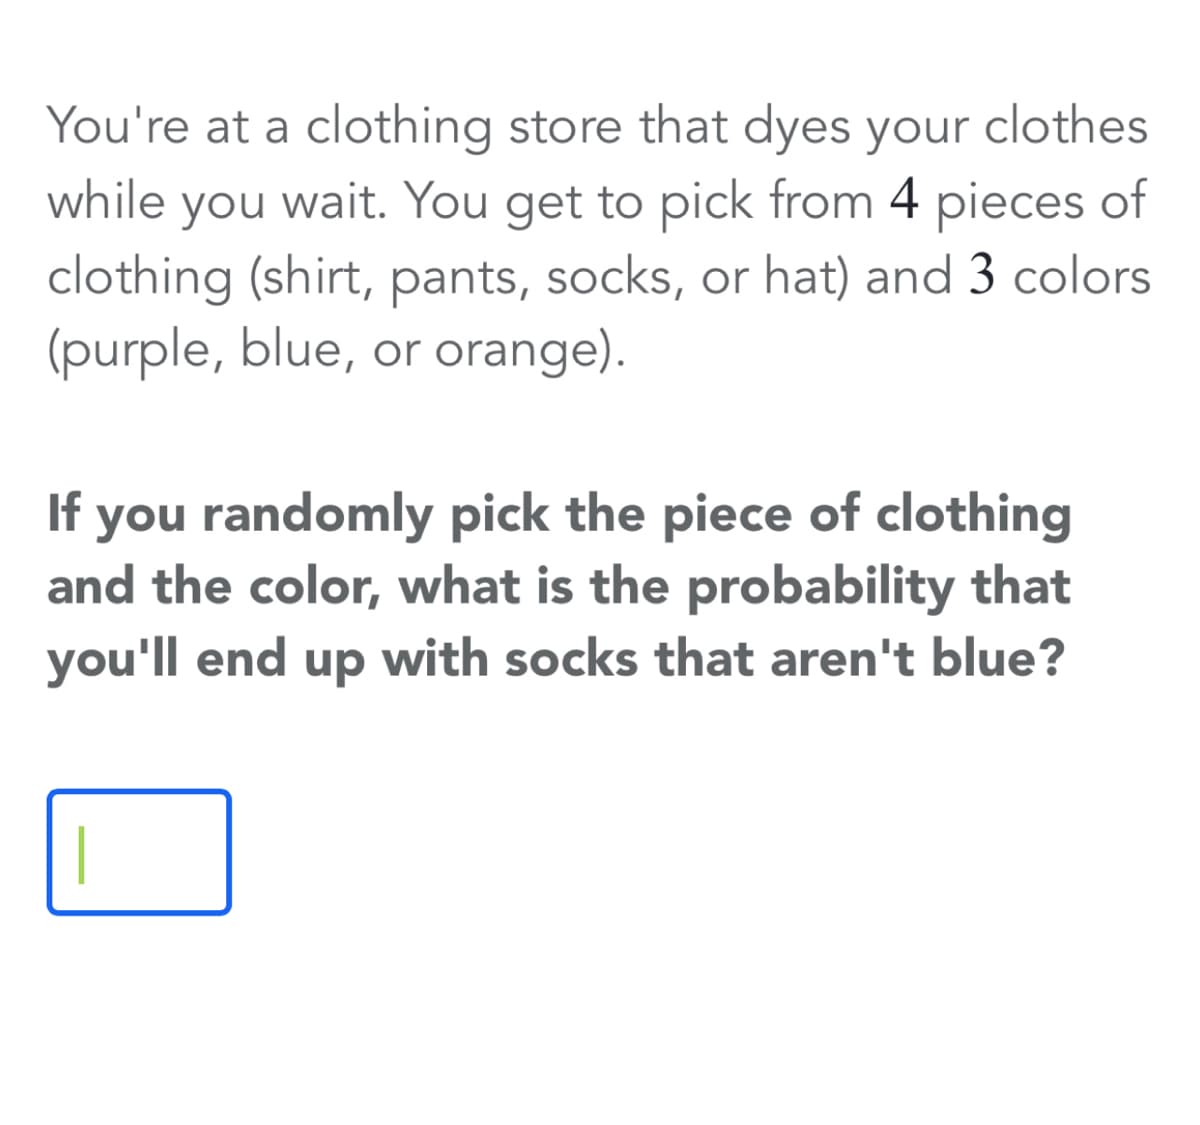 You're at a clothing store that dyes your clothes
while you wait. You get to pick from 4 pieces of
clothing (shirt, pants, socks, or hat) and 3 colors
(purple, blue, or orange).
you randomly pick the piece of clothing
and the color, what is the probability that
you'll end up with socks that aren't blue?
If
